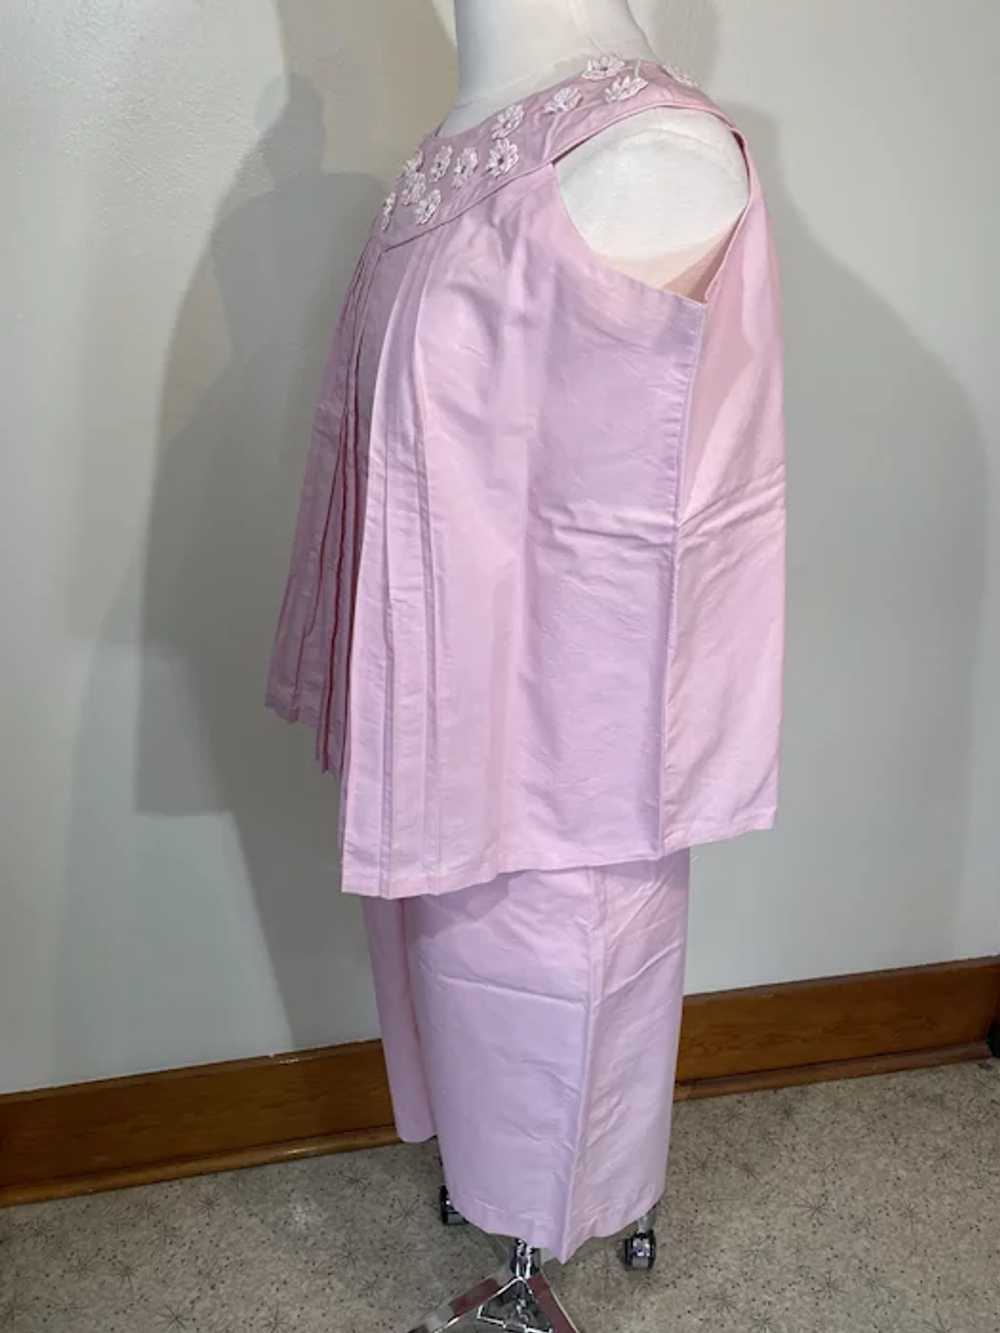 Vintage 1950s Pink Cotton Maternity Top and Skirt - image 4